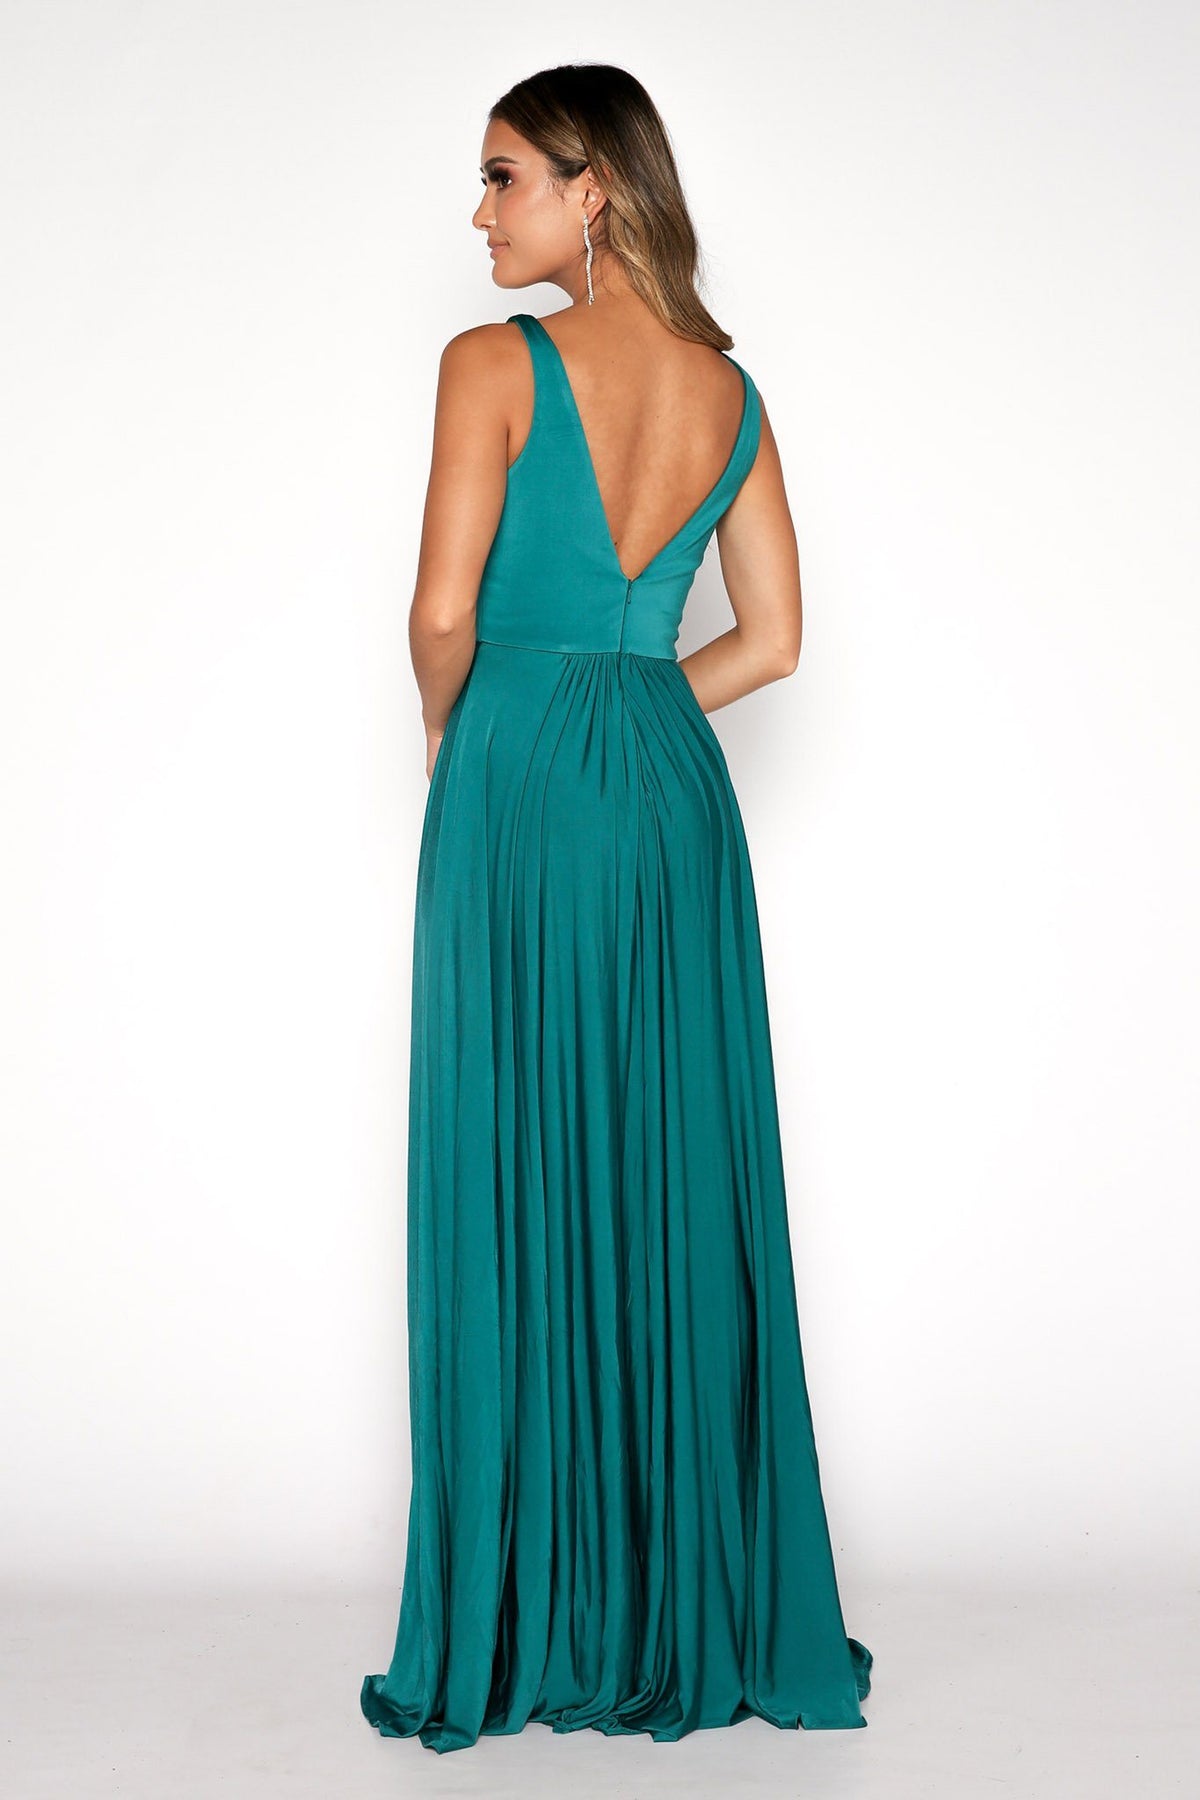 Open Back Design of Emerald Green Flowy Floor-Length A Line Maxi Dress featuring fitted V-Neckline Bodice, and Thigh-High Front Split